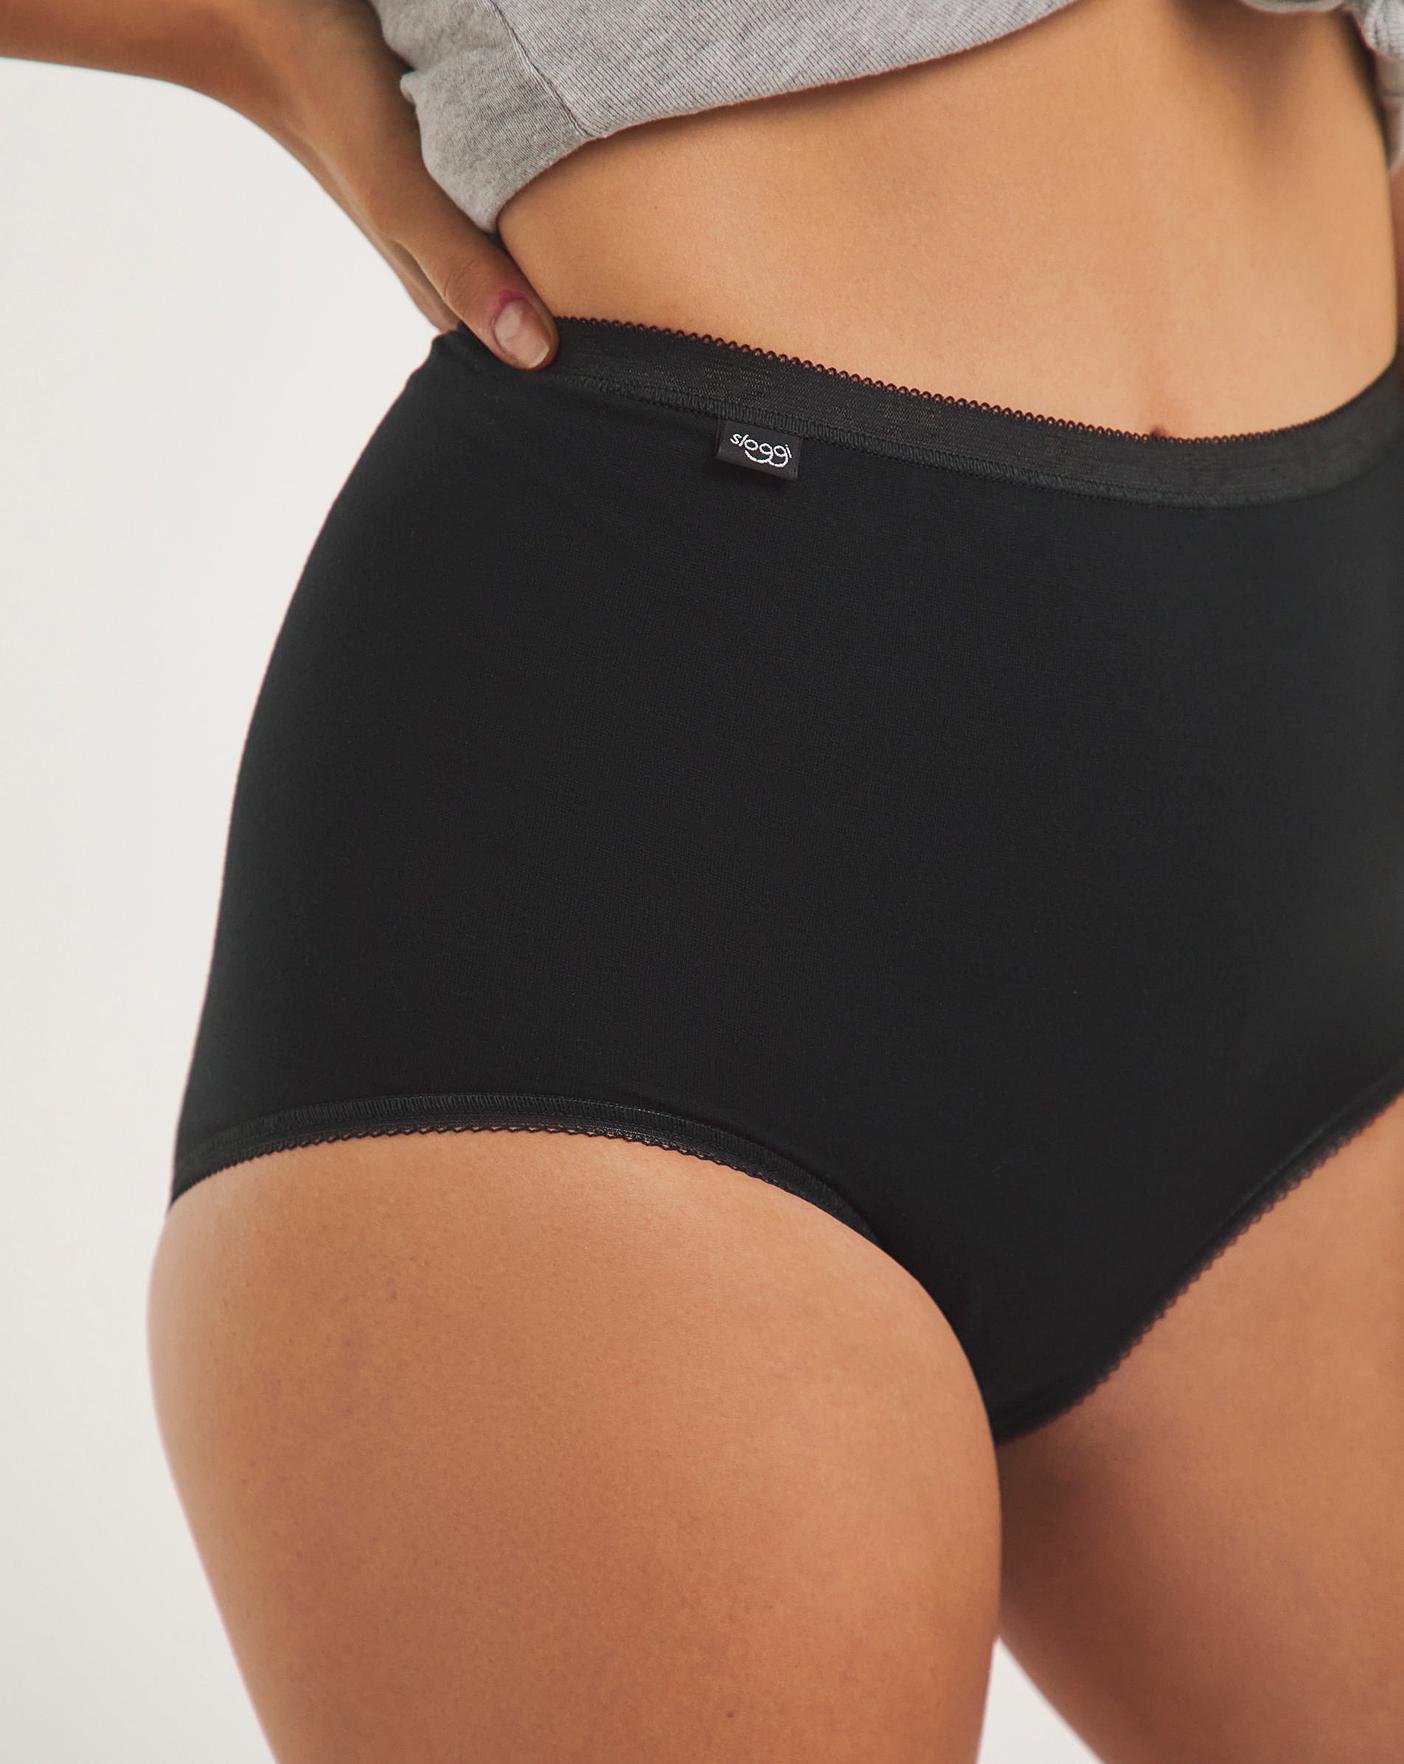 Can you tumble dry Sloggi Maxi Brief knickers? – Carr & Westley